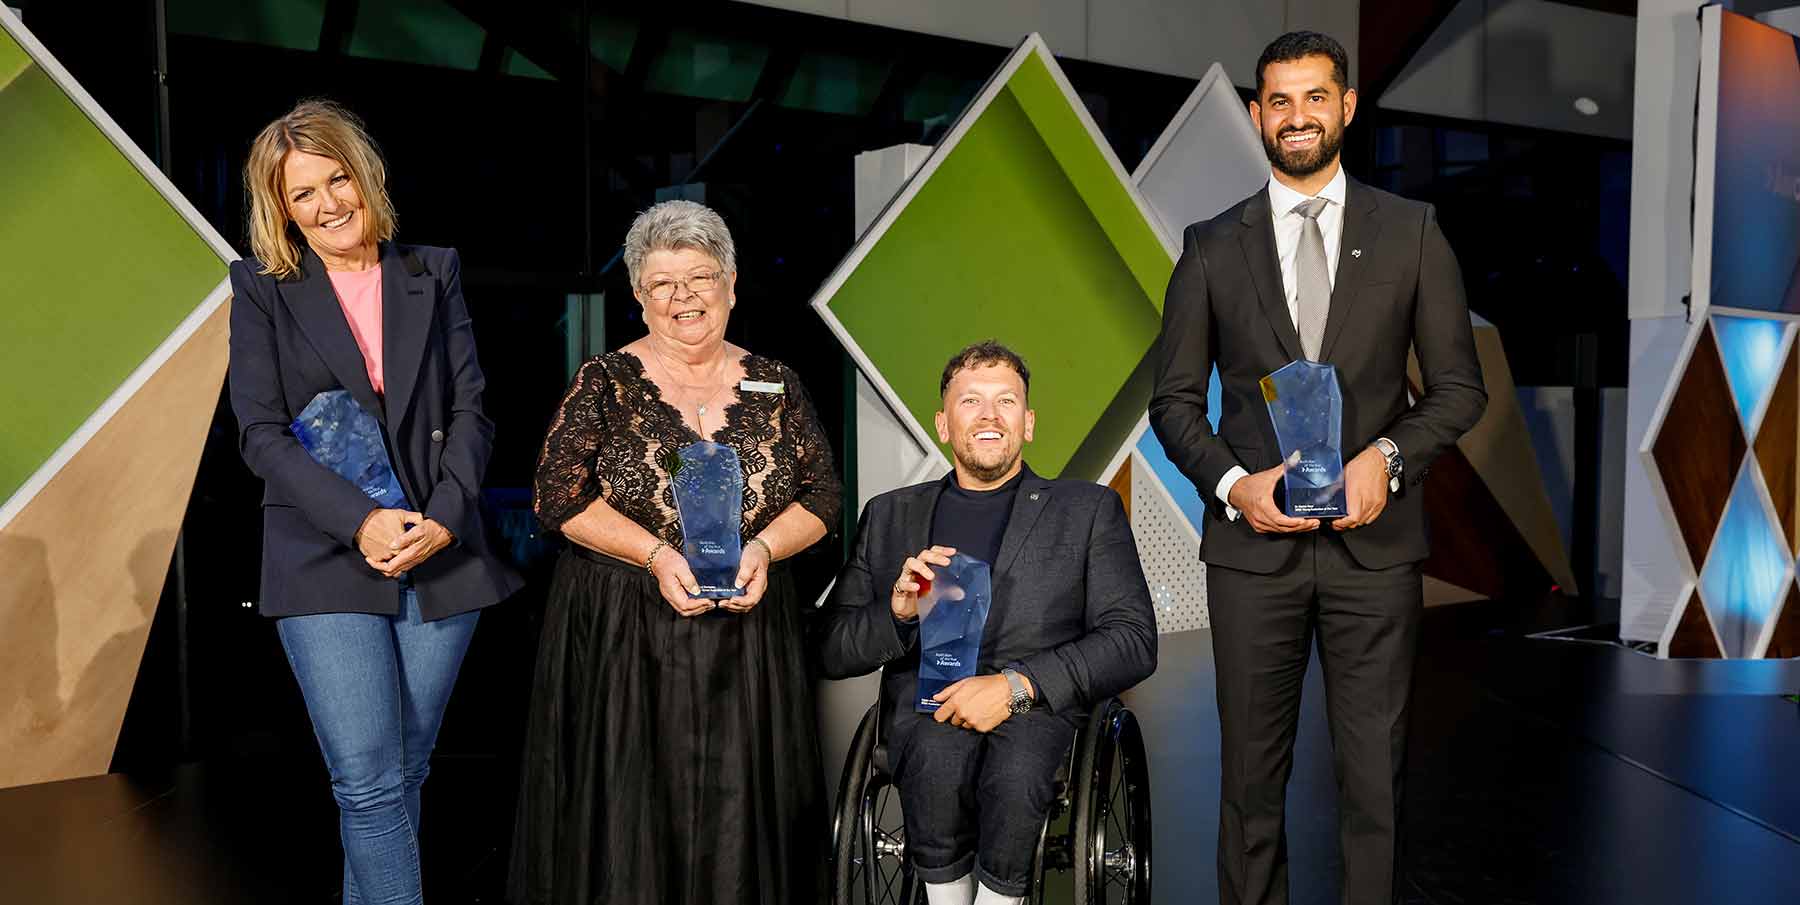 2022 Australian of the Year recipients in Canberra